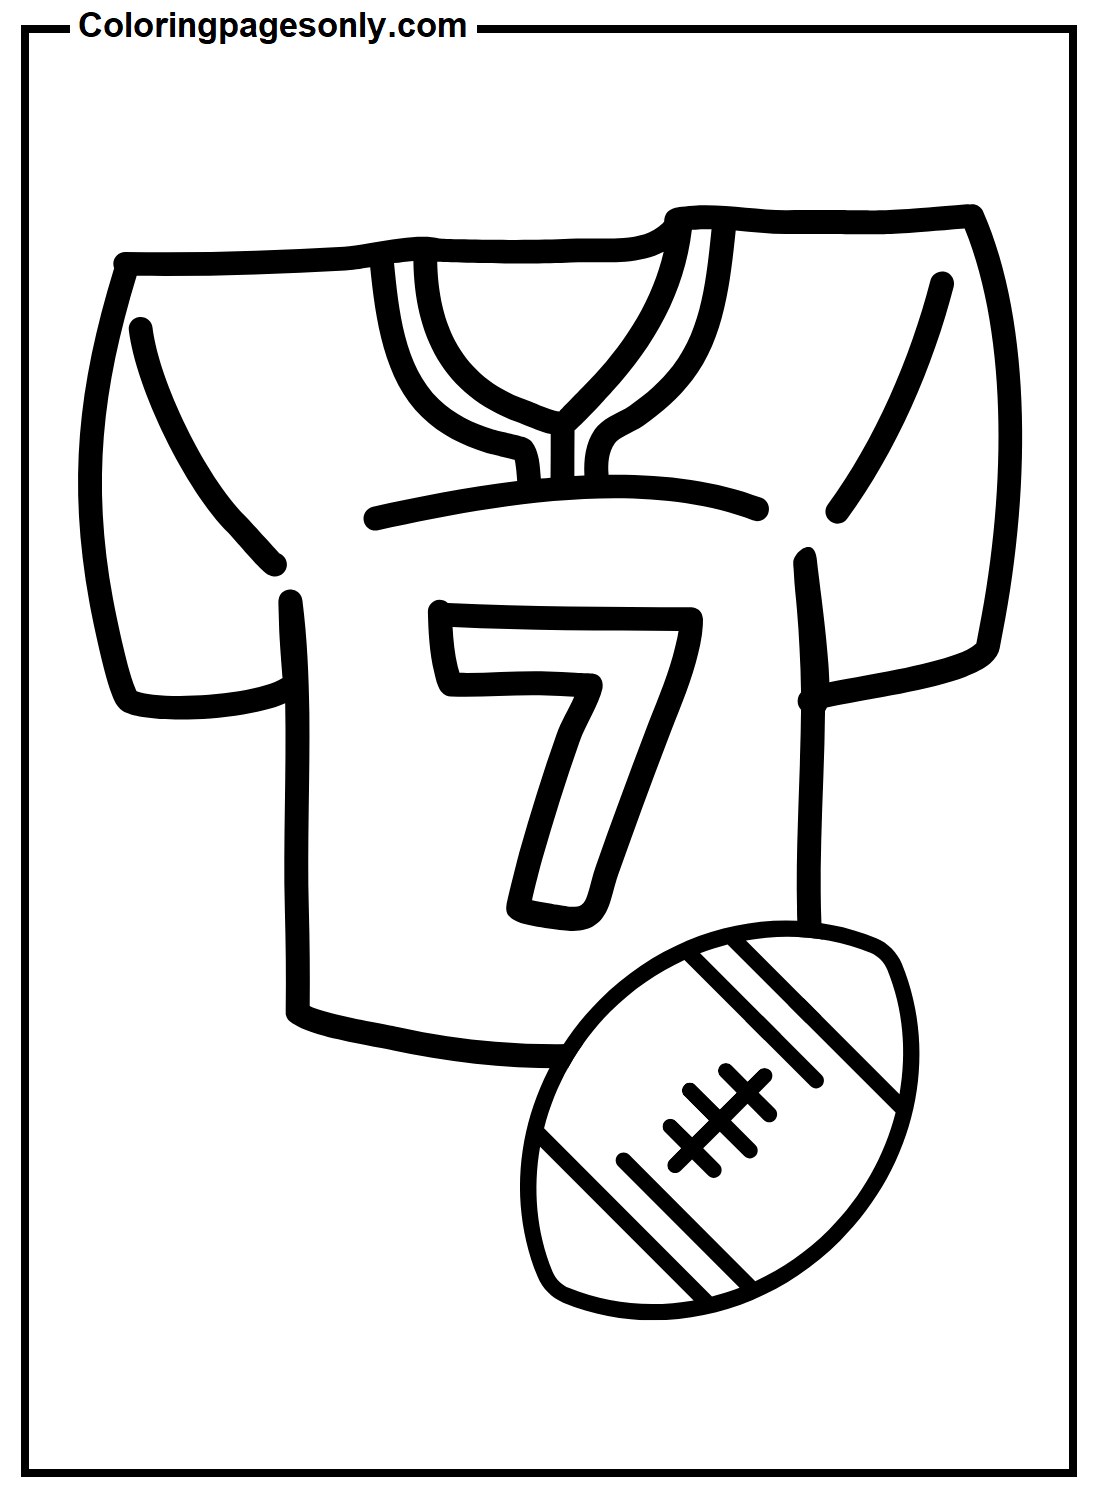 Super Bowl Jersey with Ball Coloring Page Free Printable Coloring Pages